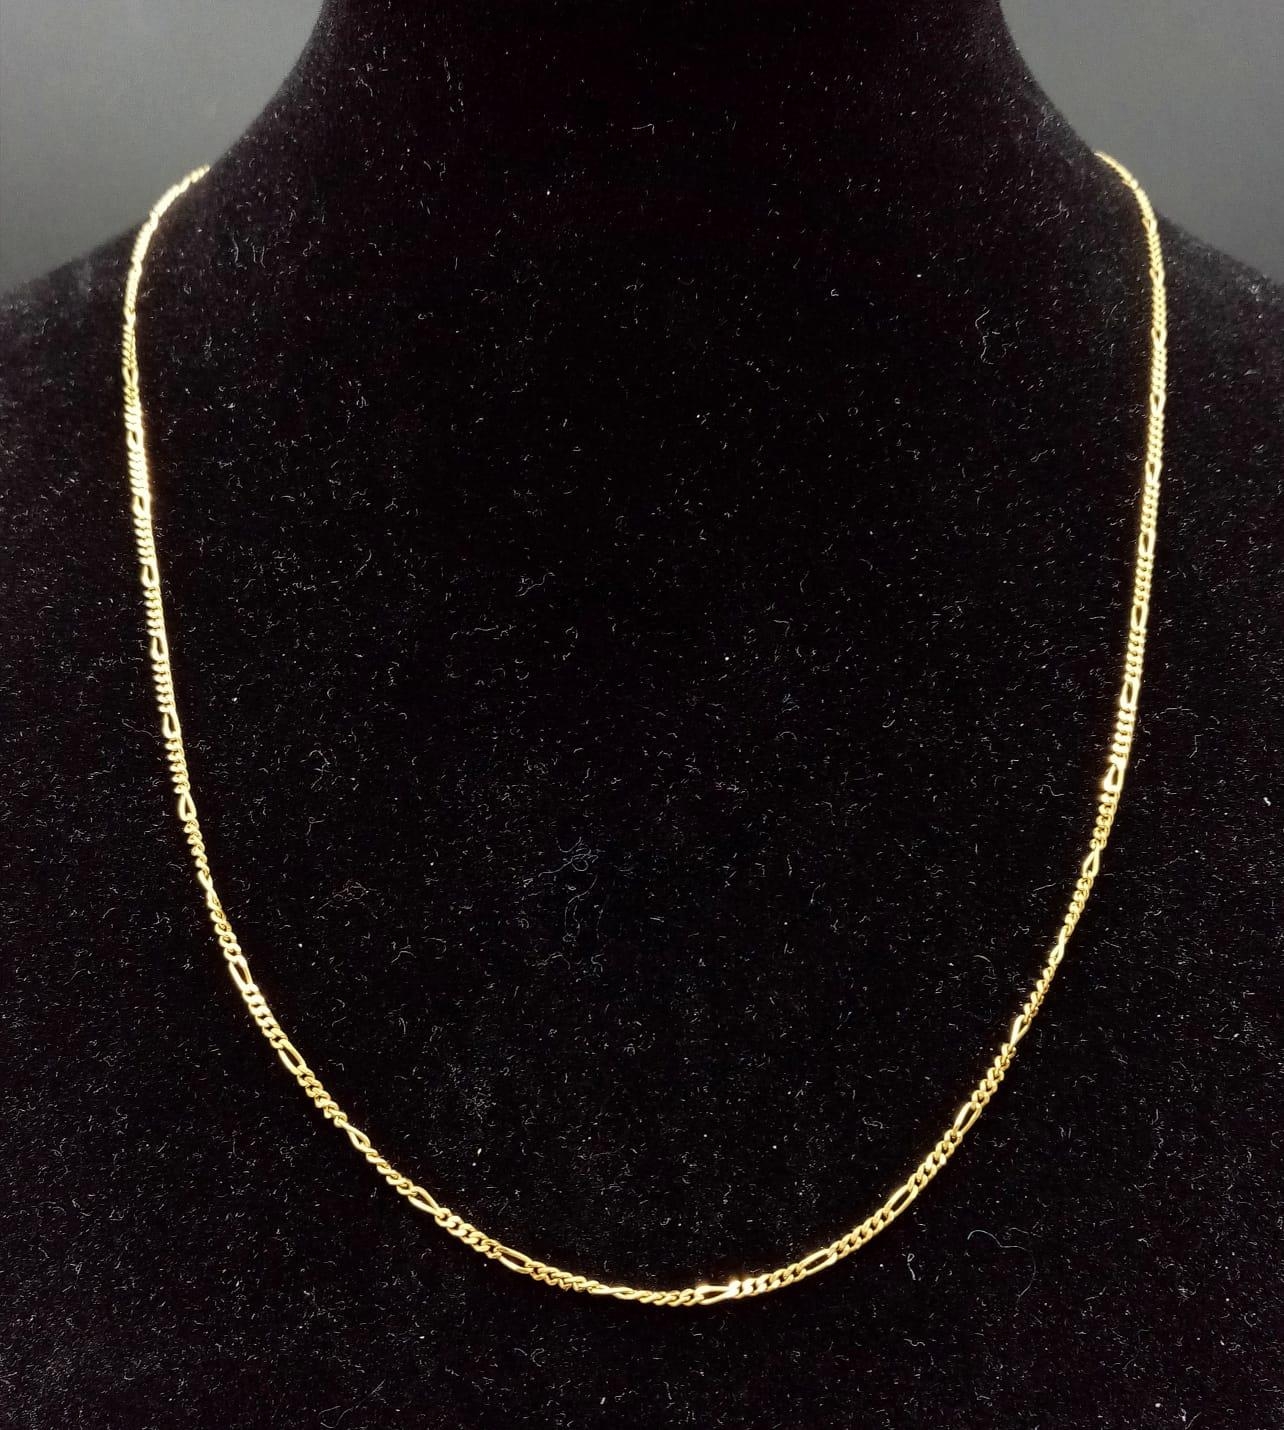 An 18K Yellow Gold Delicate Figaro Link Necklace. 44cm length. 3.43g weight. - Image 2 of 5